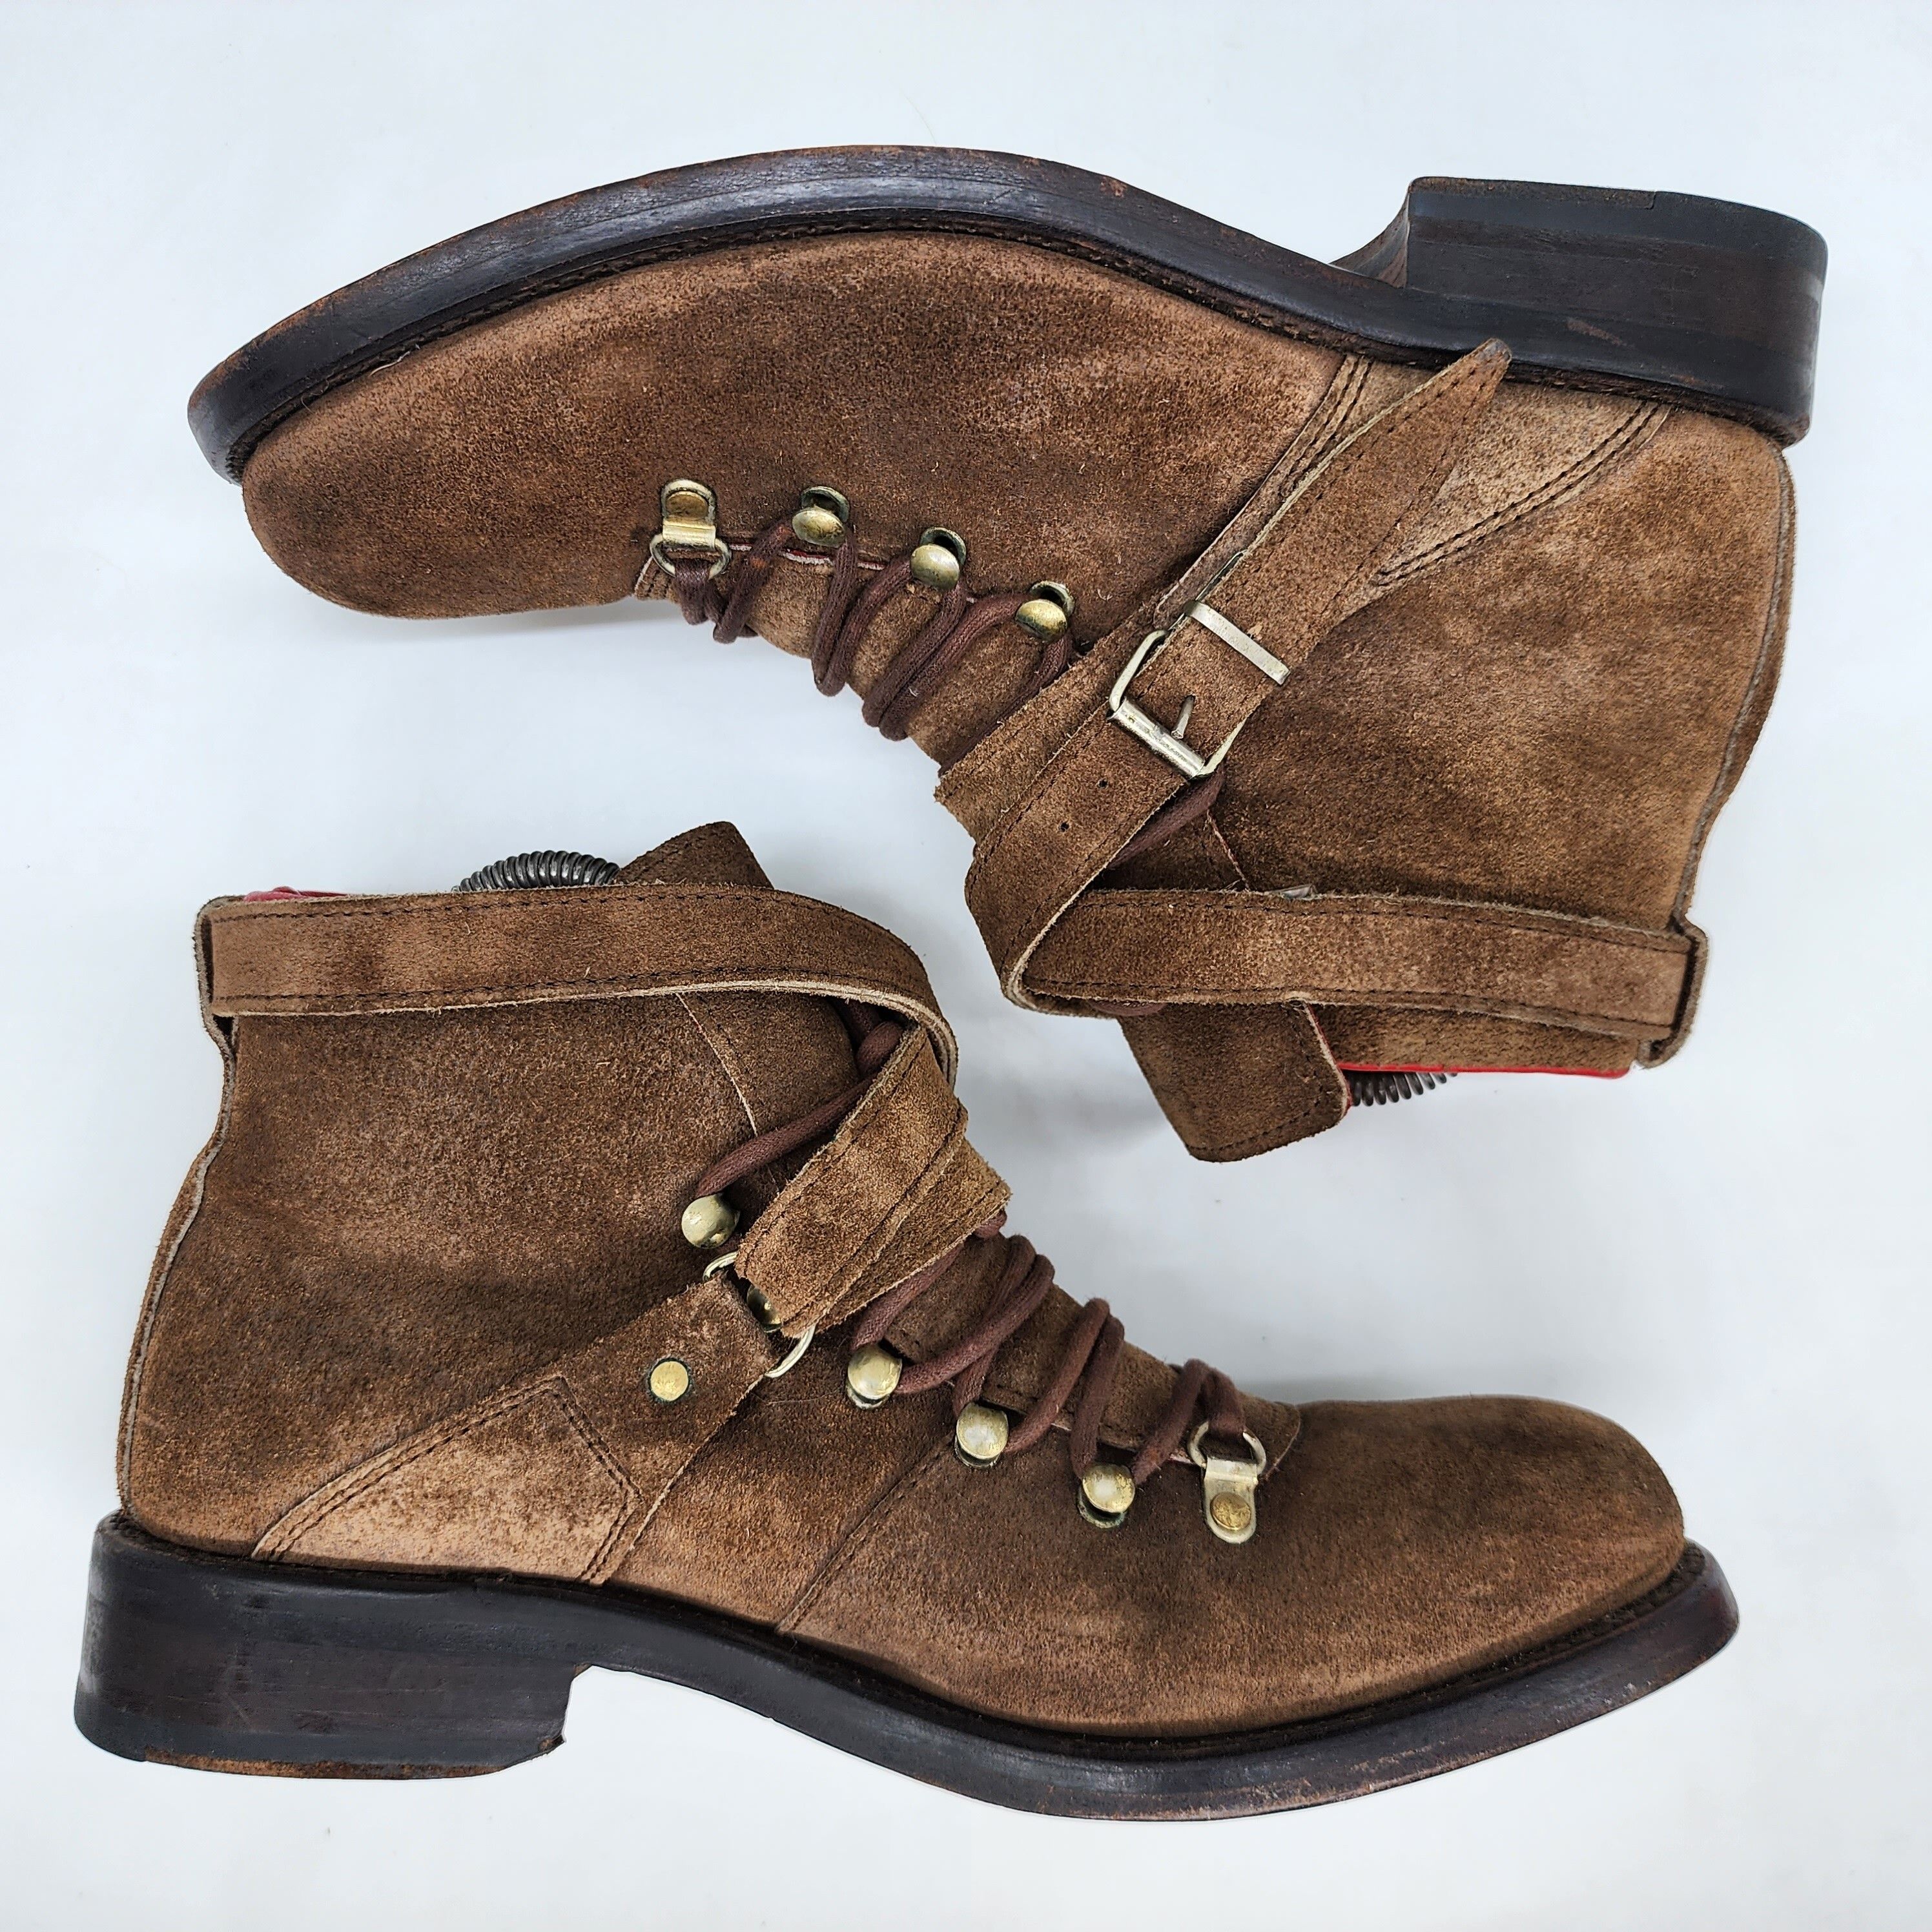 Archival Clothing - Jean Baptiste Rautureau - Archival Strap Hiking Boot - 6